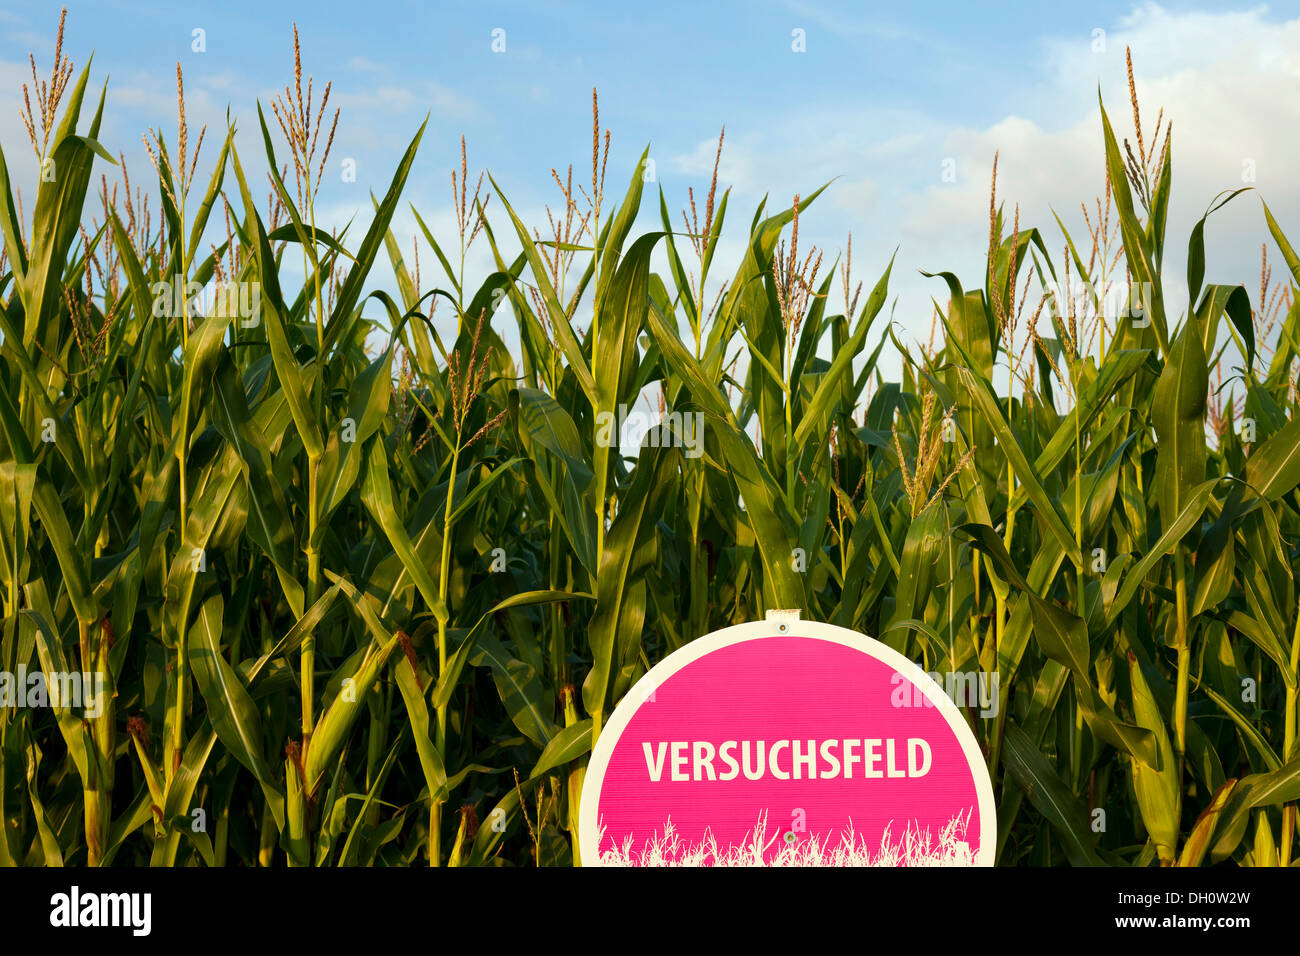 A trial field of corn Stock Photo